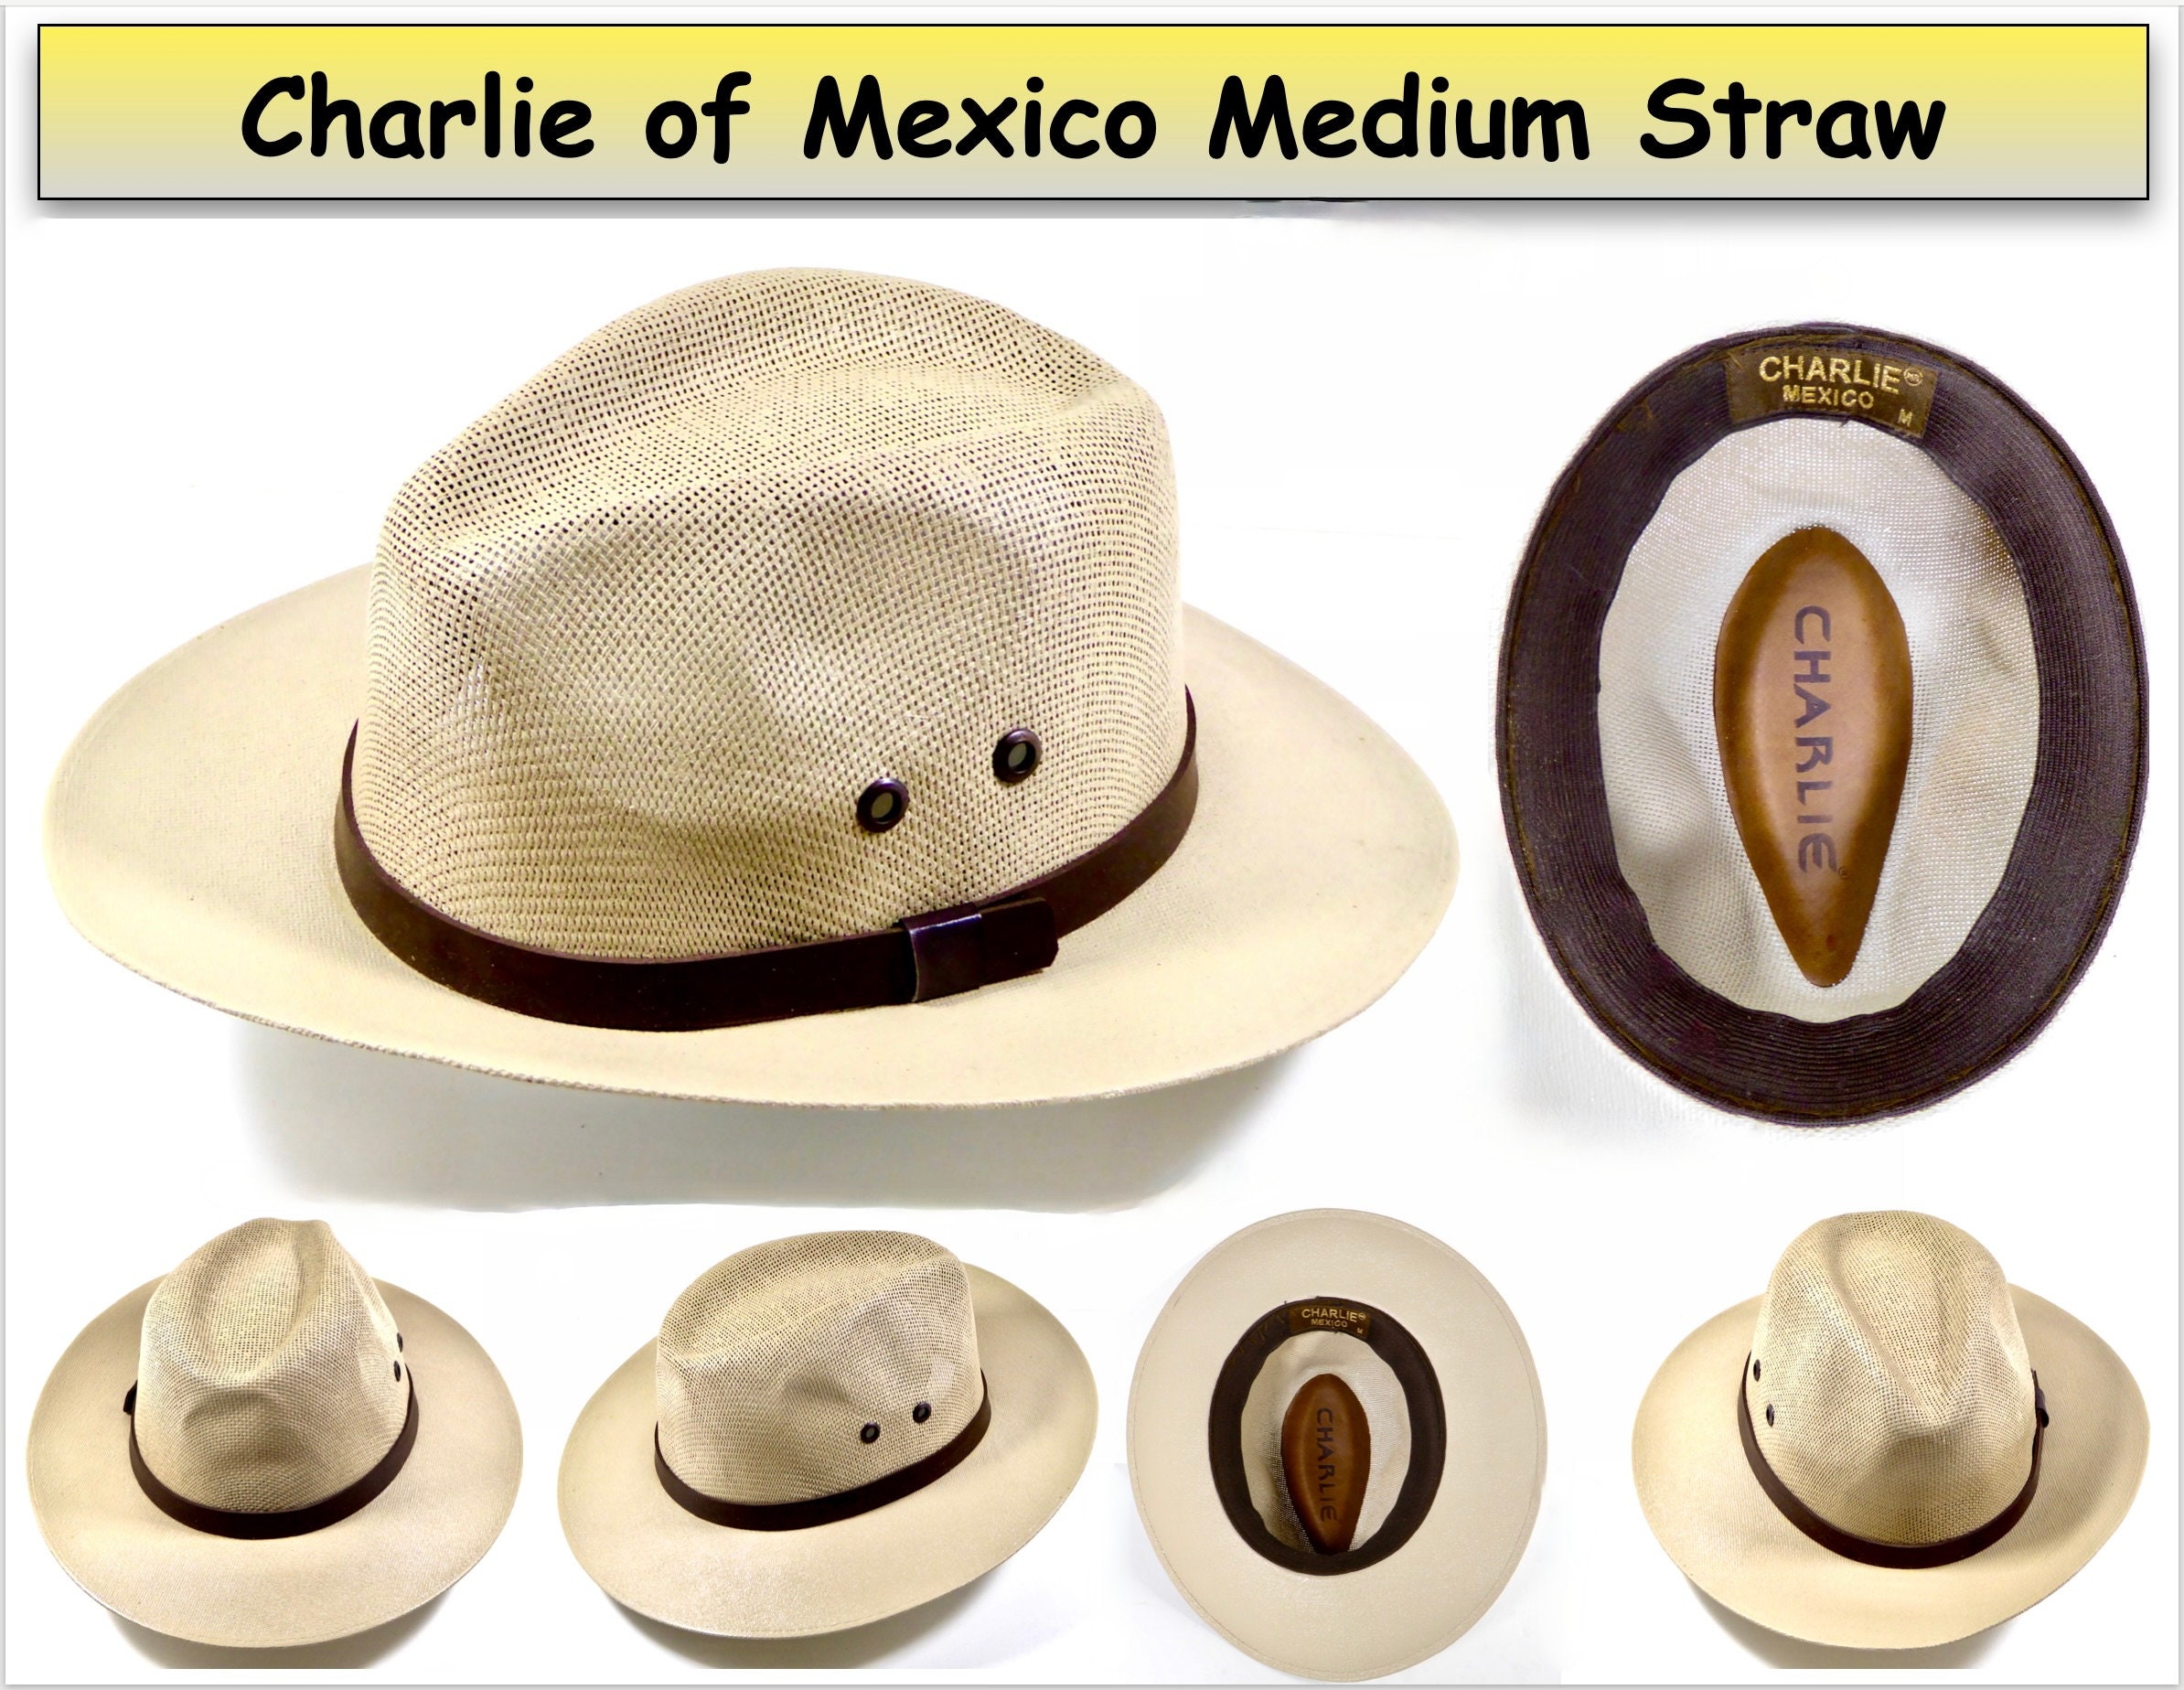 Vintage Mens Cowboy Hats, Leather, Oilskin, Straw, Dress & Work, Stetson, Outback  Bootlegger, Charlie, Luigui, Sombrero Ancho, Solo Squirrel -  Israel